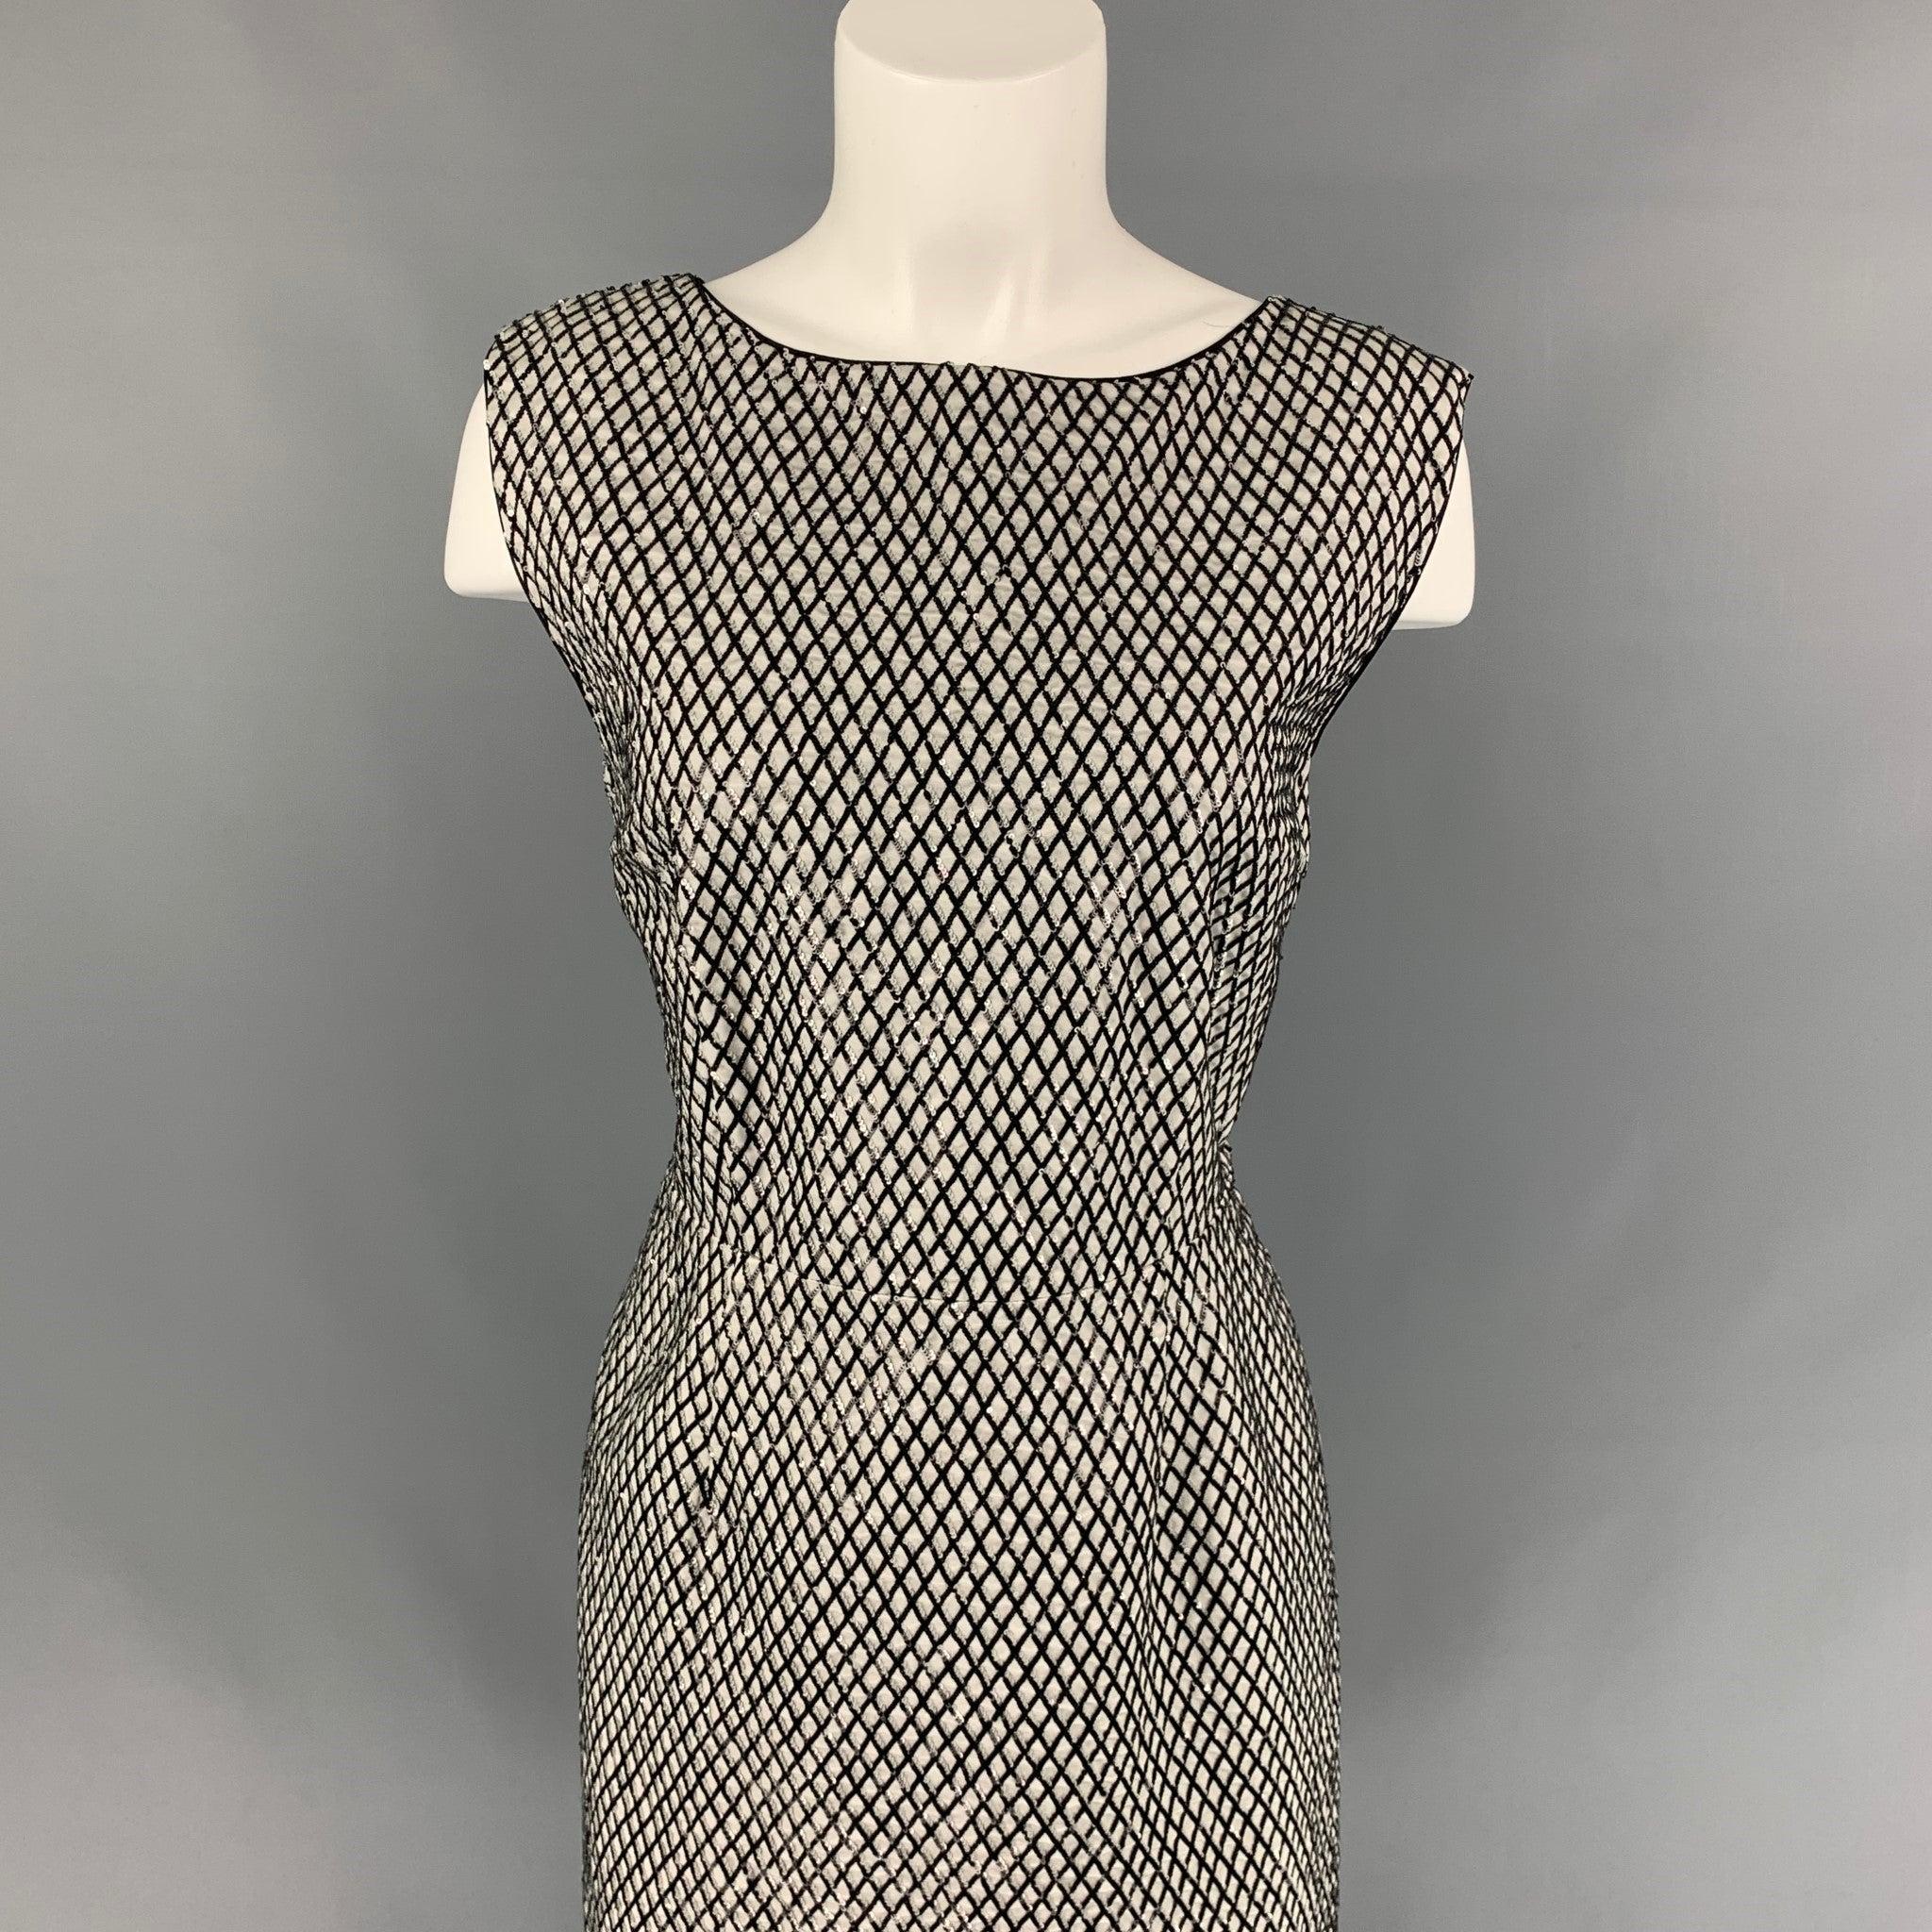 MARC JACOBS dress comes in a grey & black beaded silk with a slip liner featuring a shift style, sleeveless, and a back zip up closure. Made in USA.
Very Good
Pre-Owned Condition. 

Marked:   12 

Measurements: 
 
Shoulder: 16 inches  Bust: 36